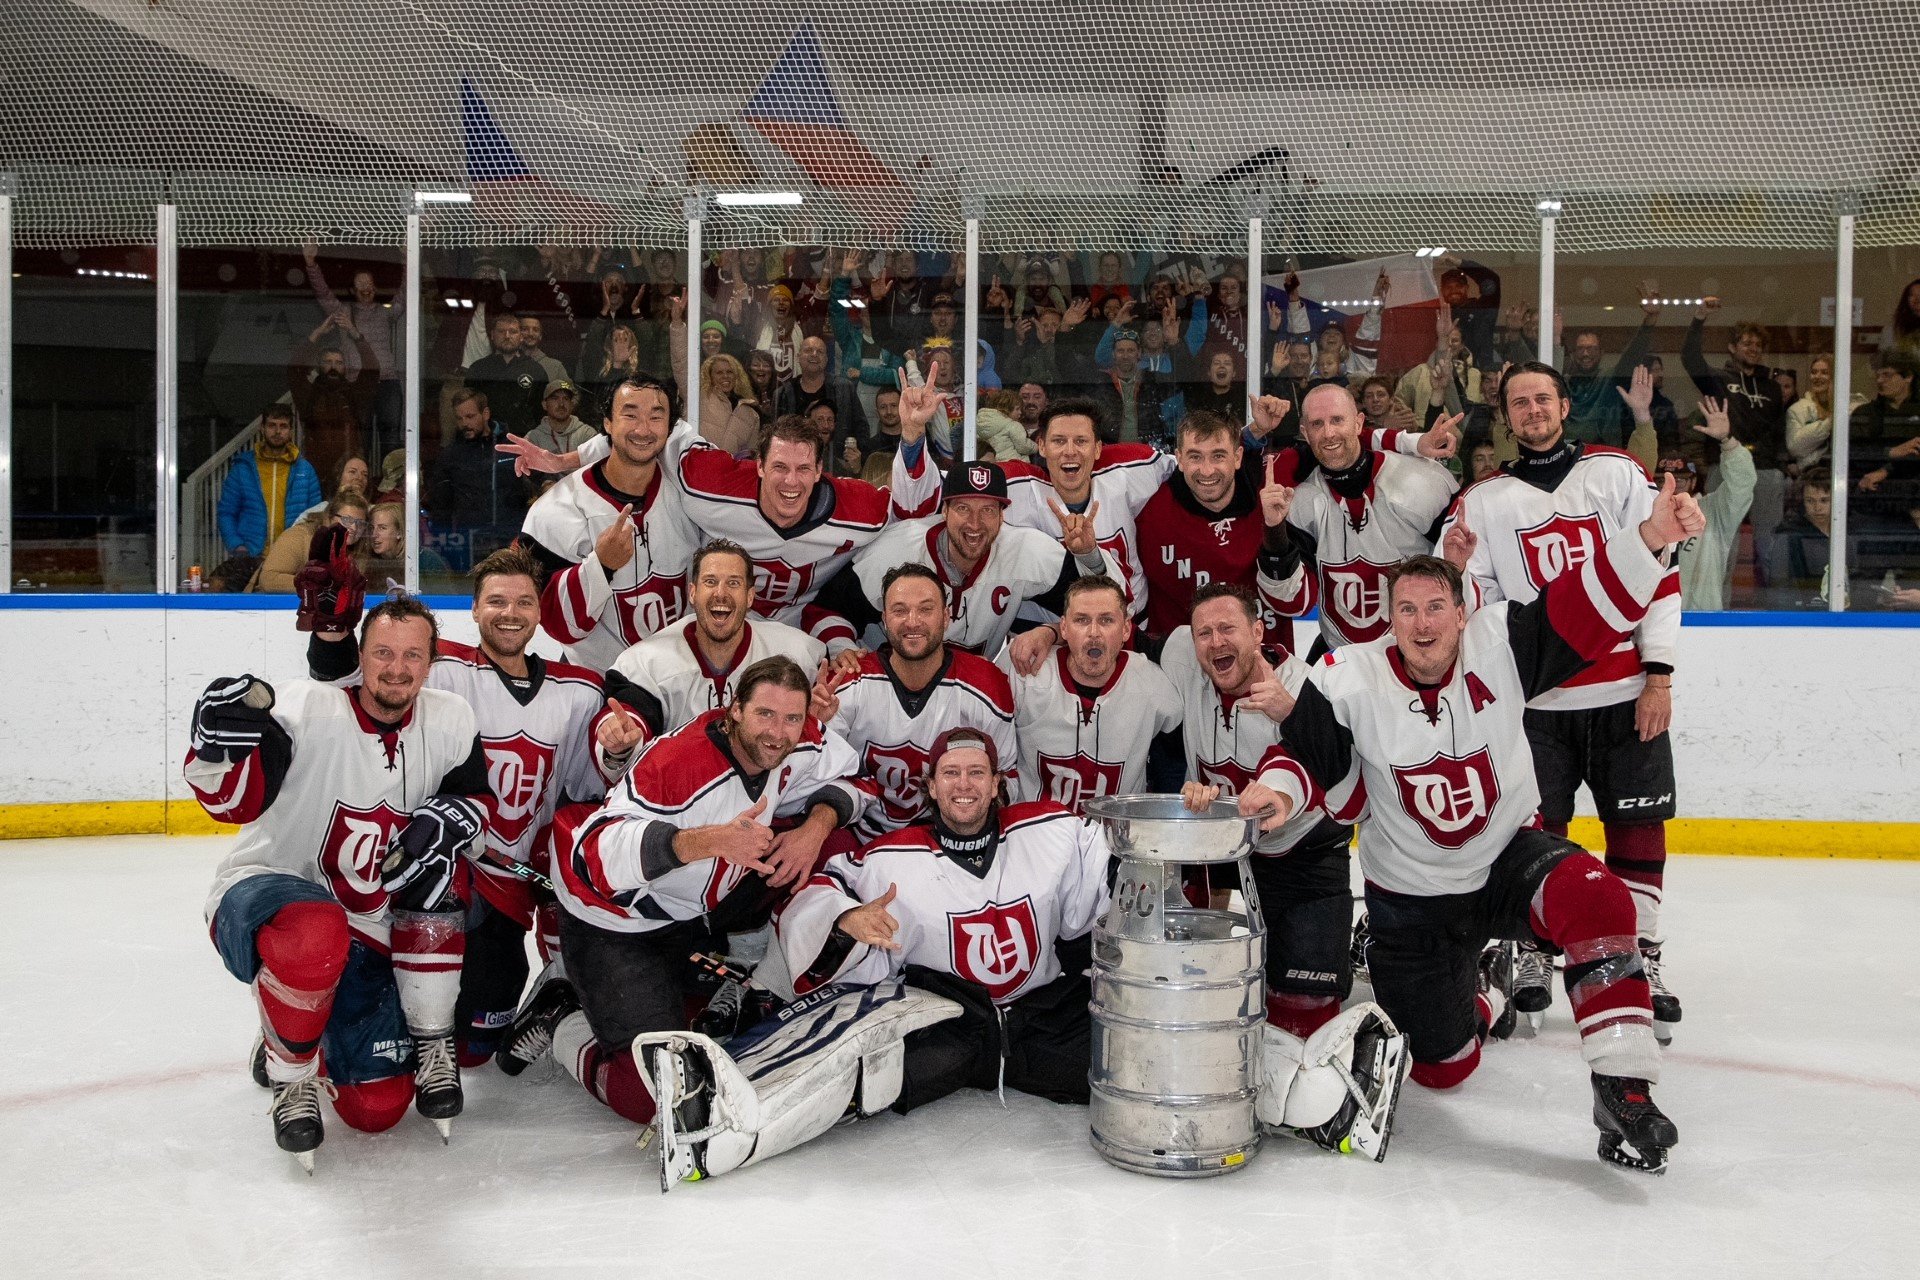 The HC Underdogs ice hockey team pictured with the Queenstown Cup after winning the A-grade final...